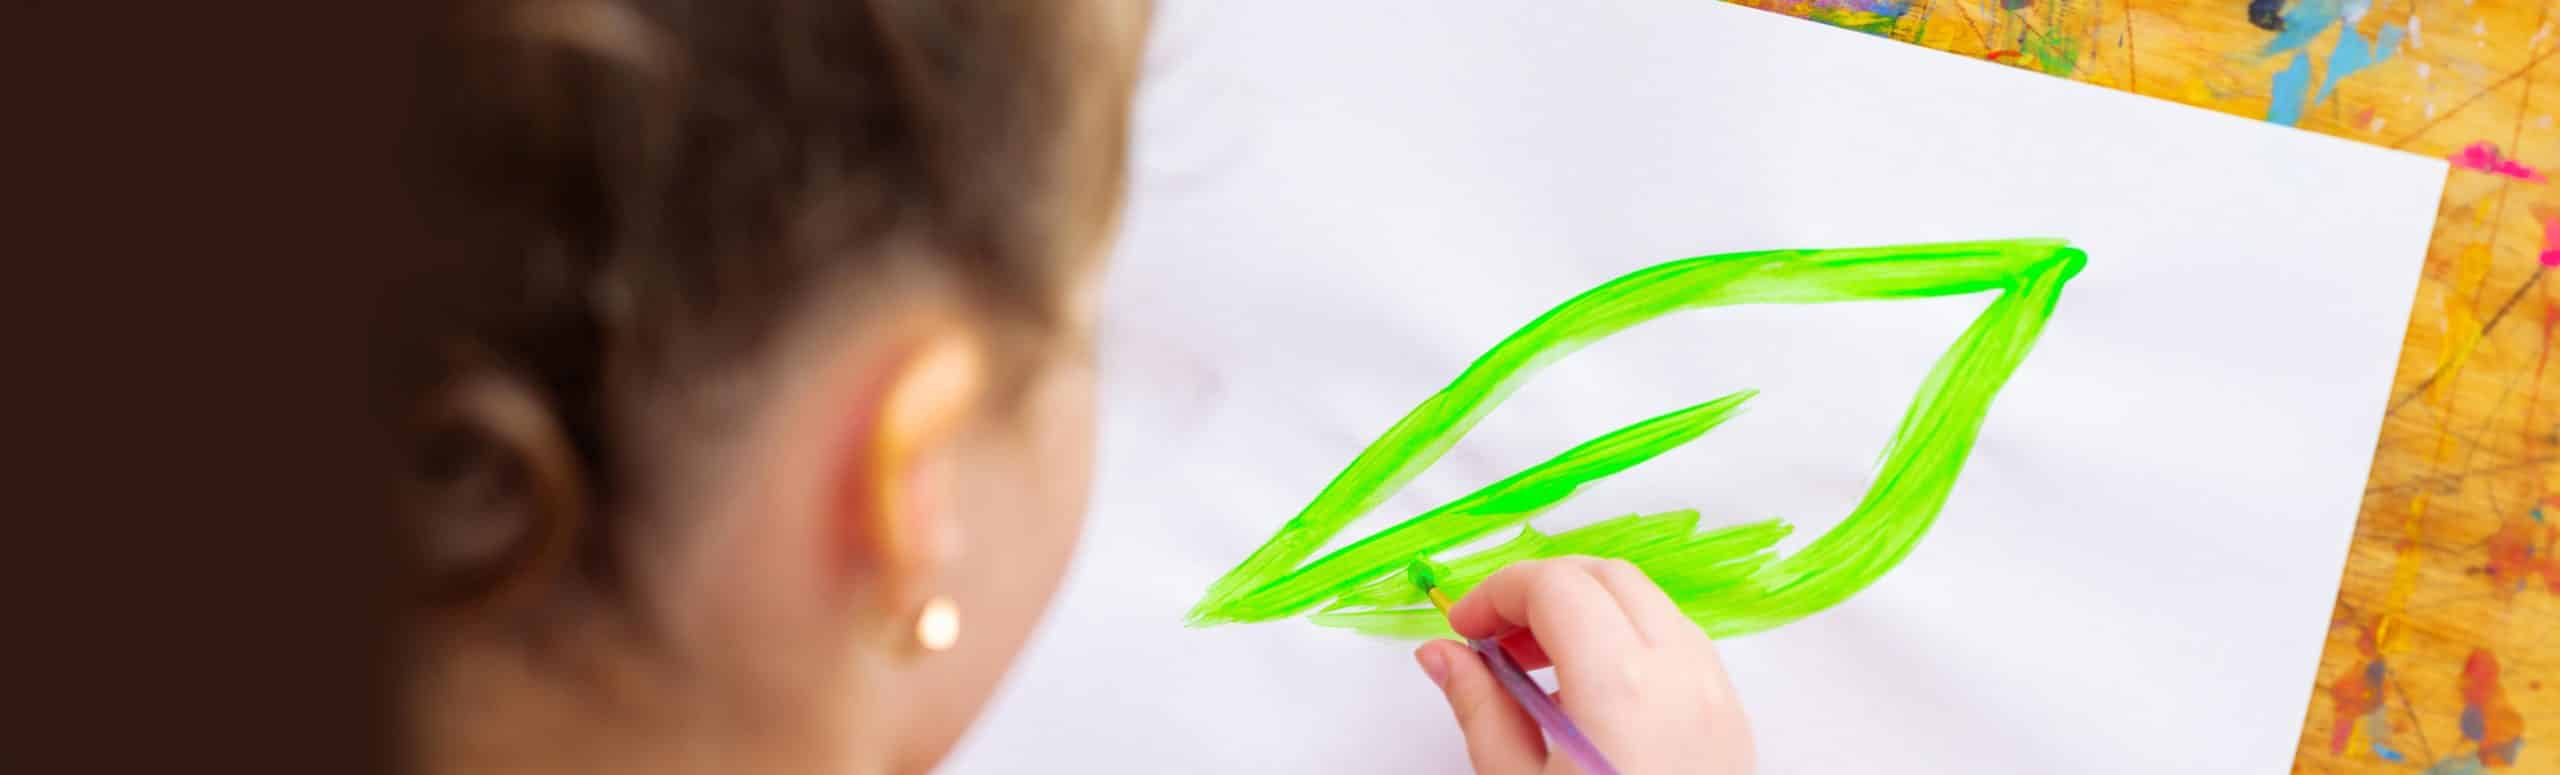 Child painting a green leaf on a white paper